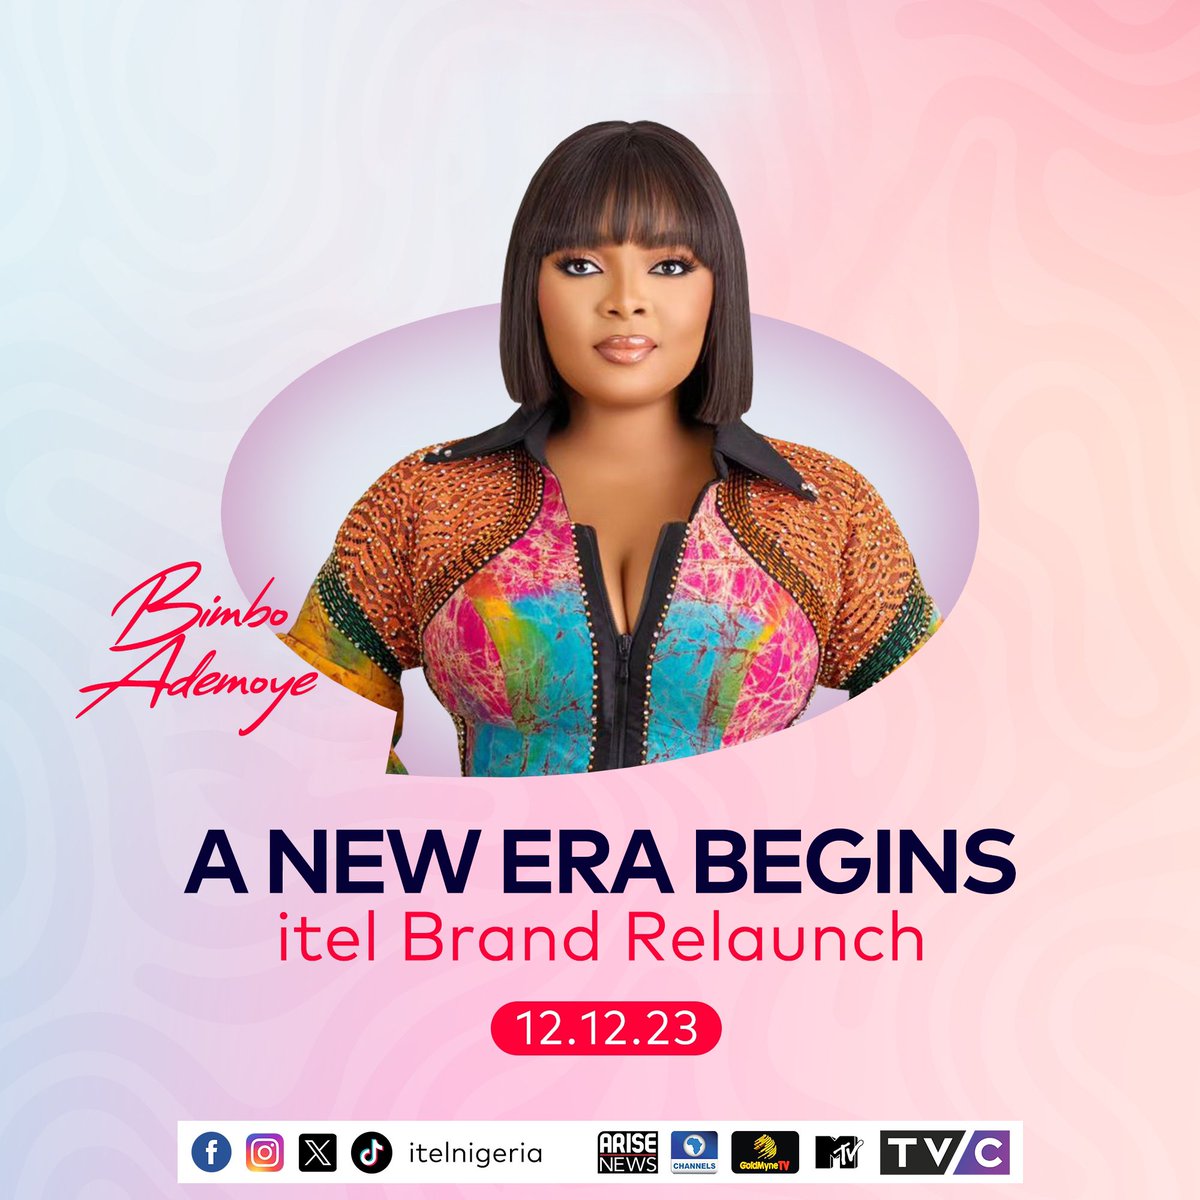 Set your alarms and get your outfit sorted because Bimbo Ademoye is coming to the new era! You don't want to be anywhere else on 12.12.2023. #TheNewitel #itelBrandRelaunch